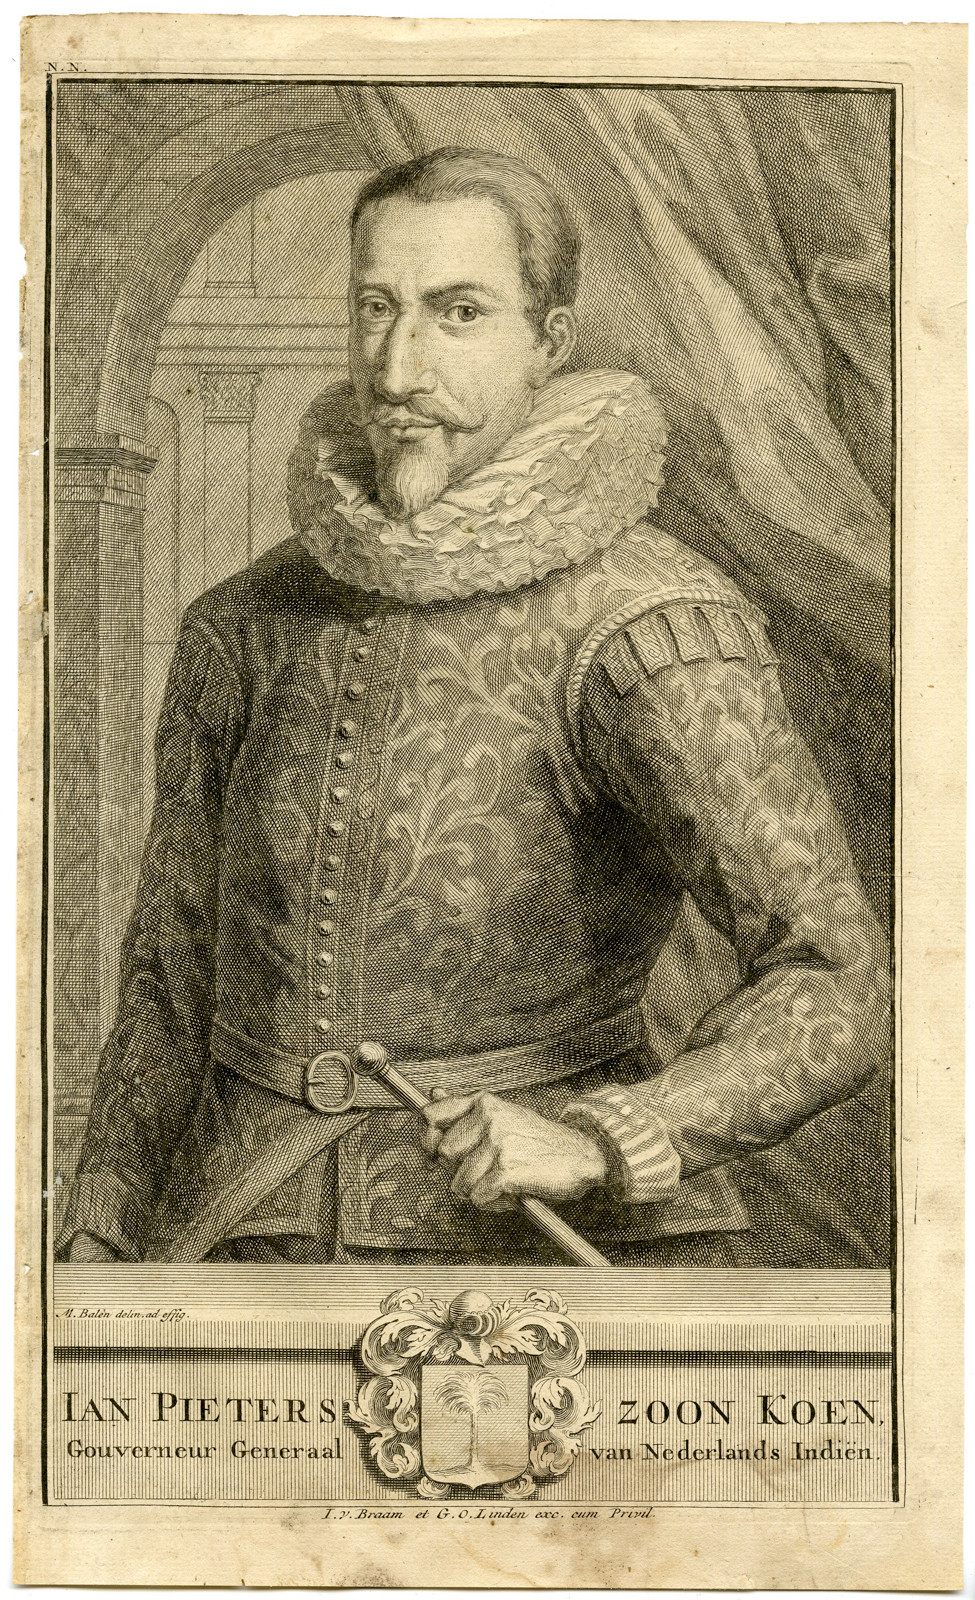 Jan Pietersz Coen, the fourth Governor-General of the Dutch East India Company (VOC) and founder of Batavia (now Jakarta)